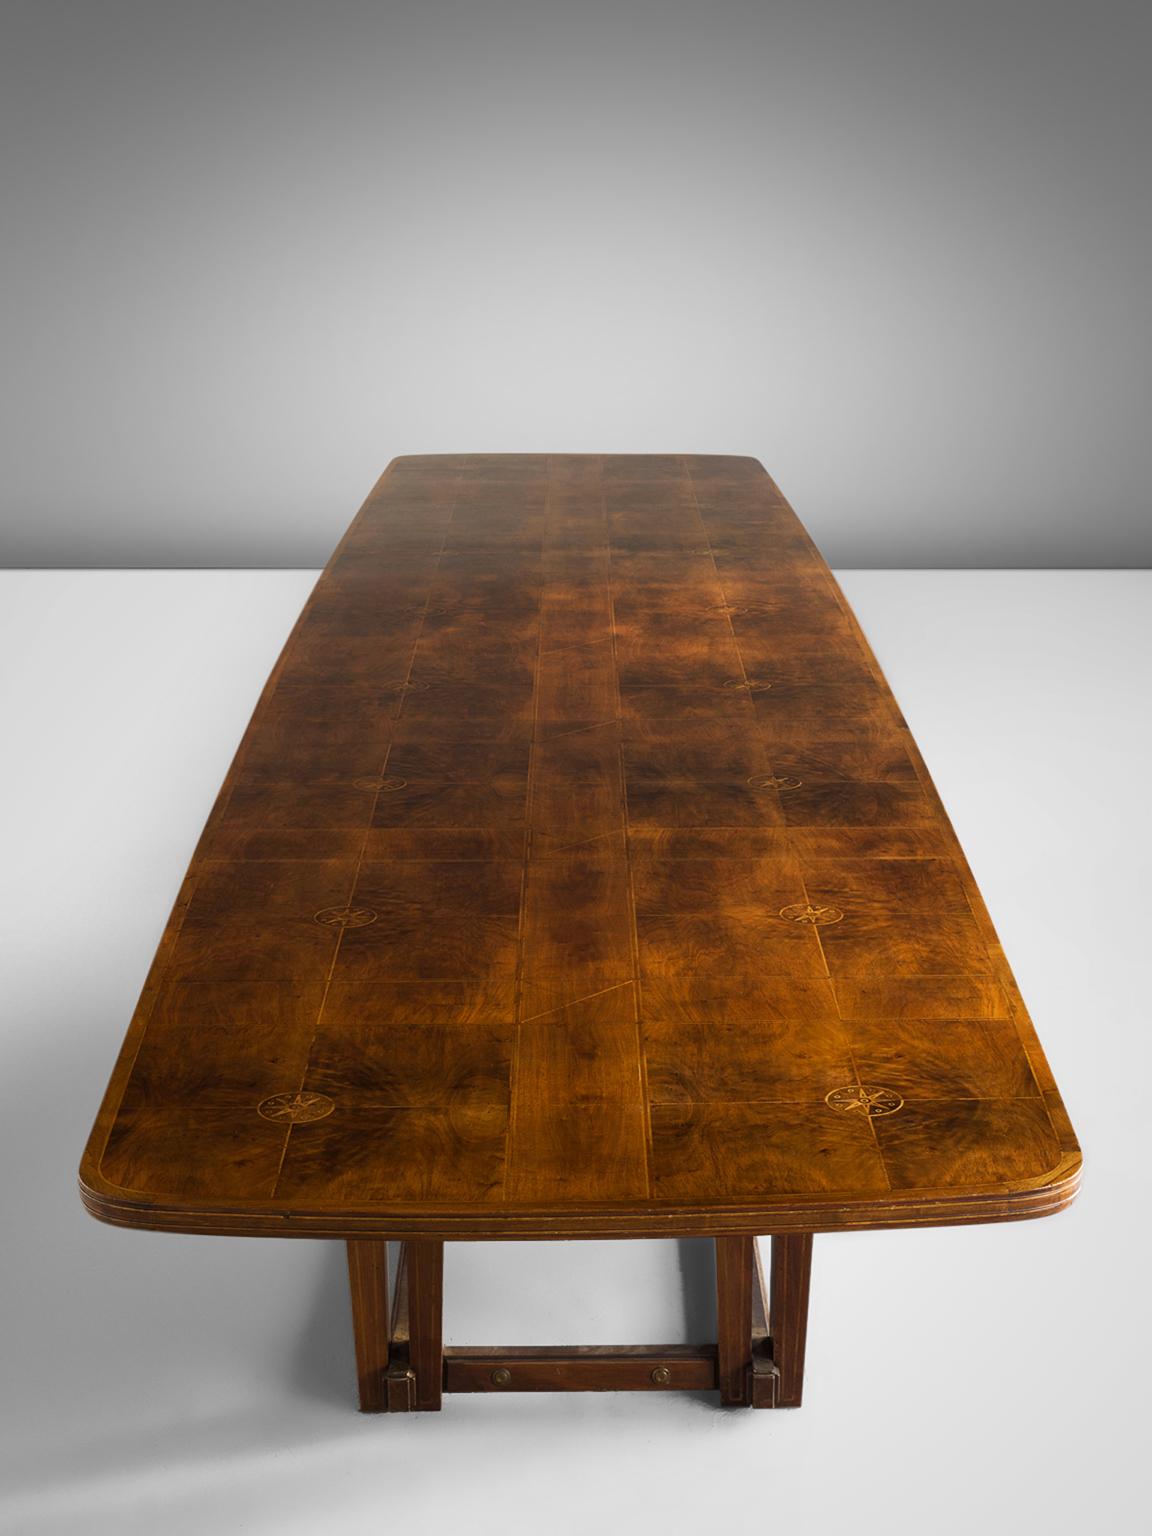 European Conference Table in Walnut with Inlay